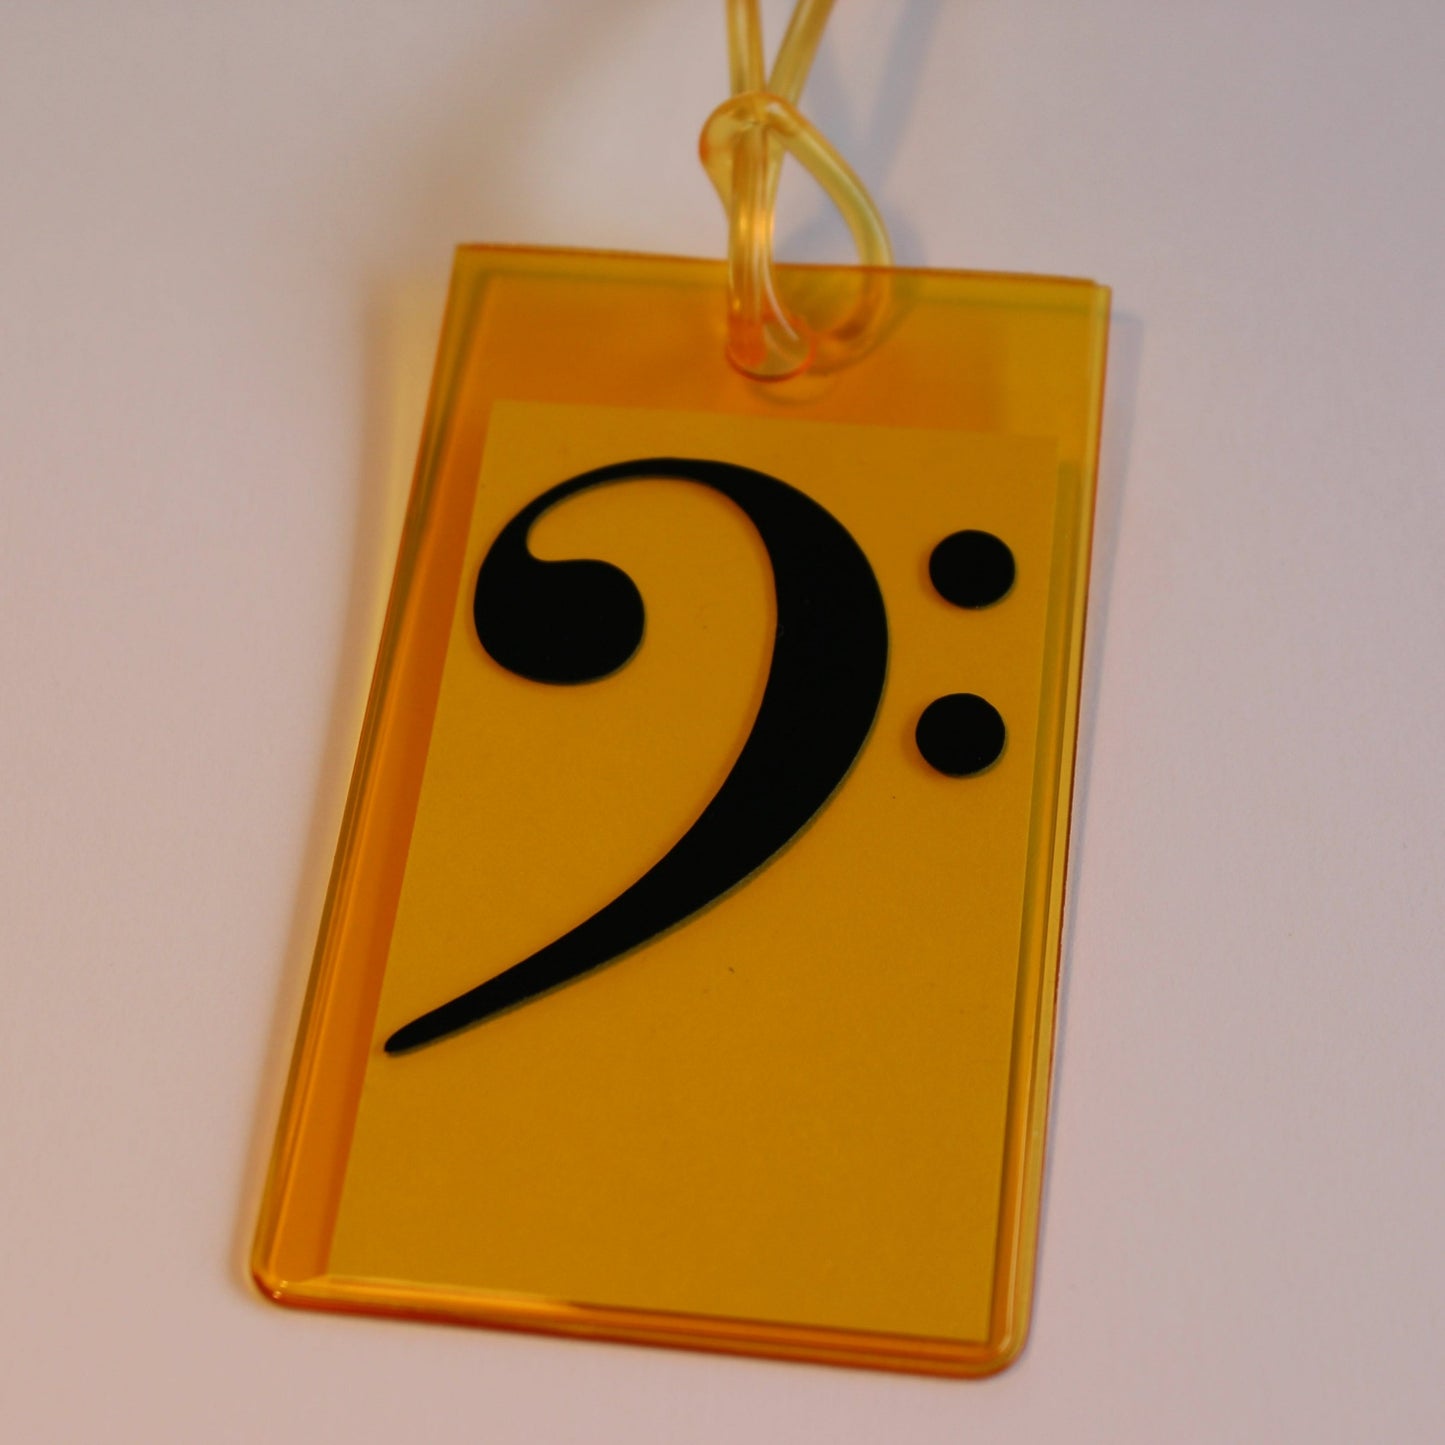 Orange instrument tag with black bass clef.